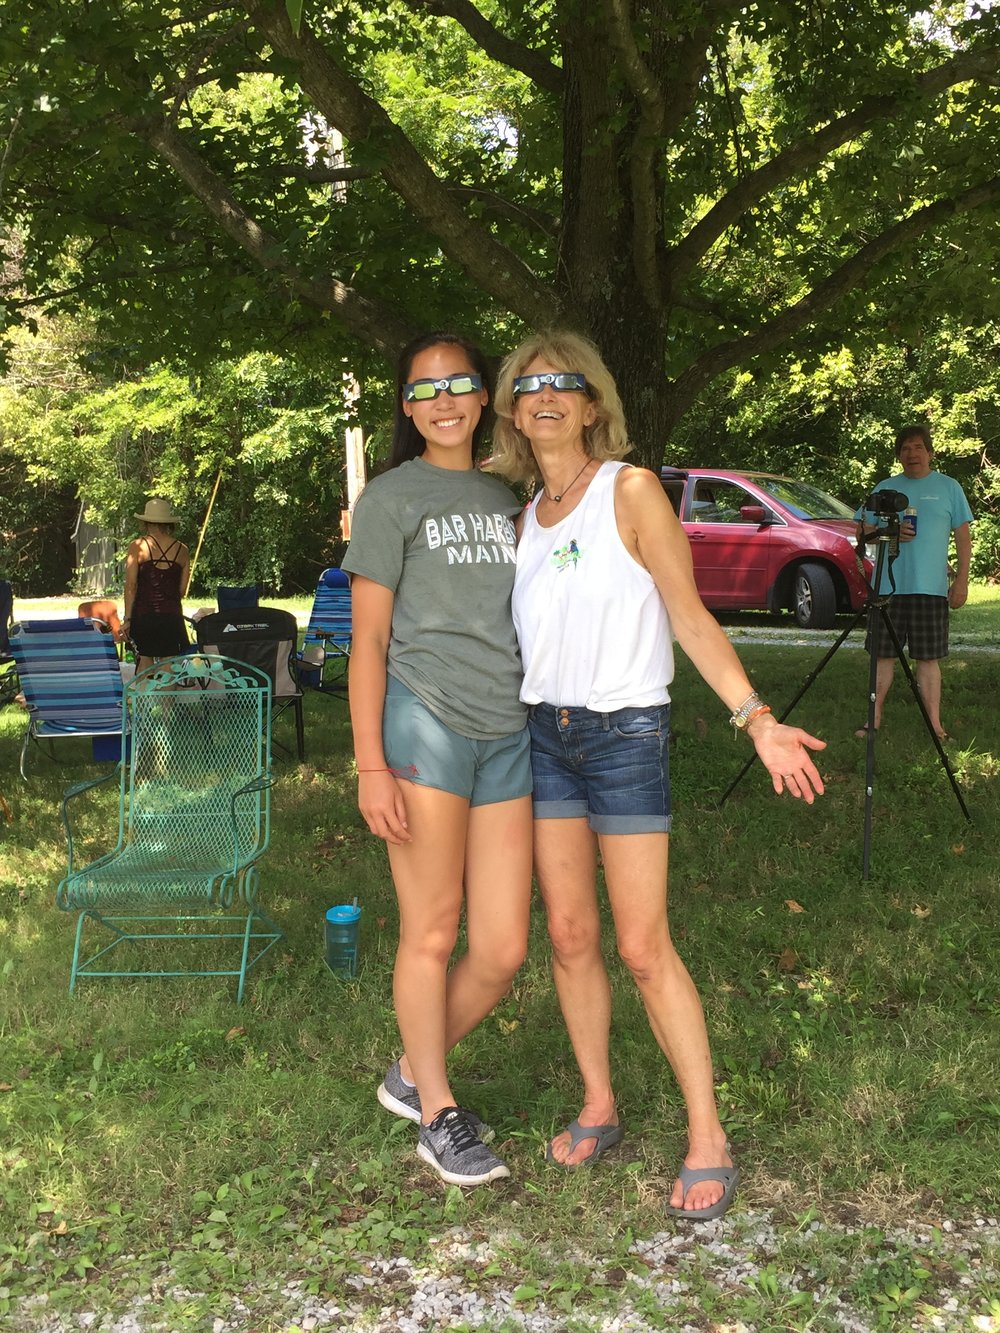 Laura Jane Mellencamp-Murphy and Colby share the Solar Eclipse in Carbondale IL 2017.JPG